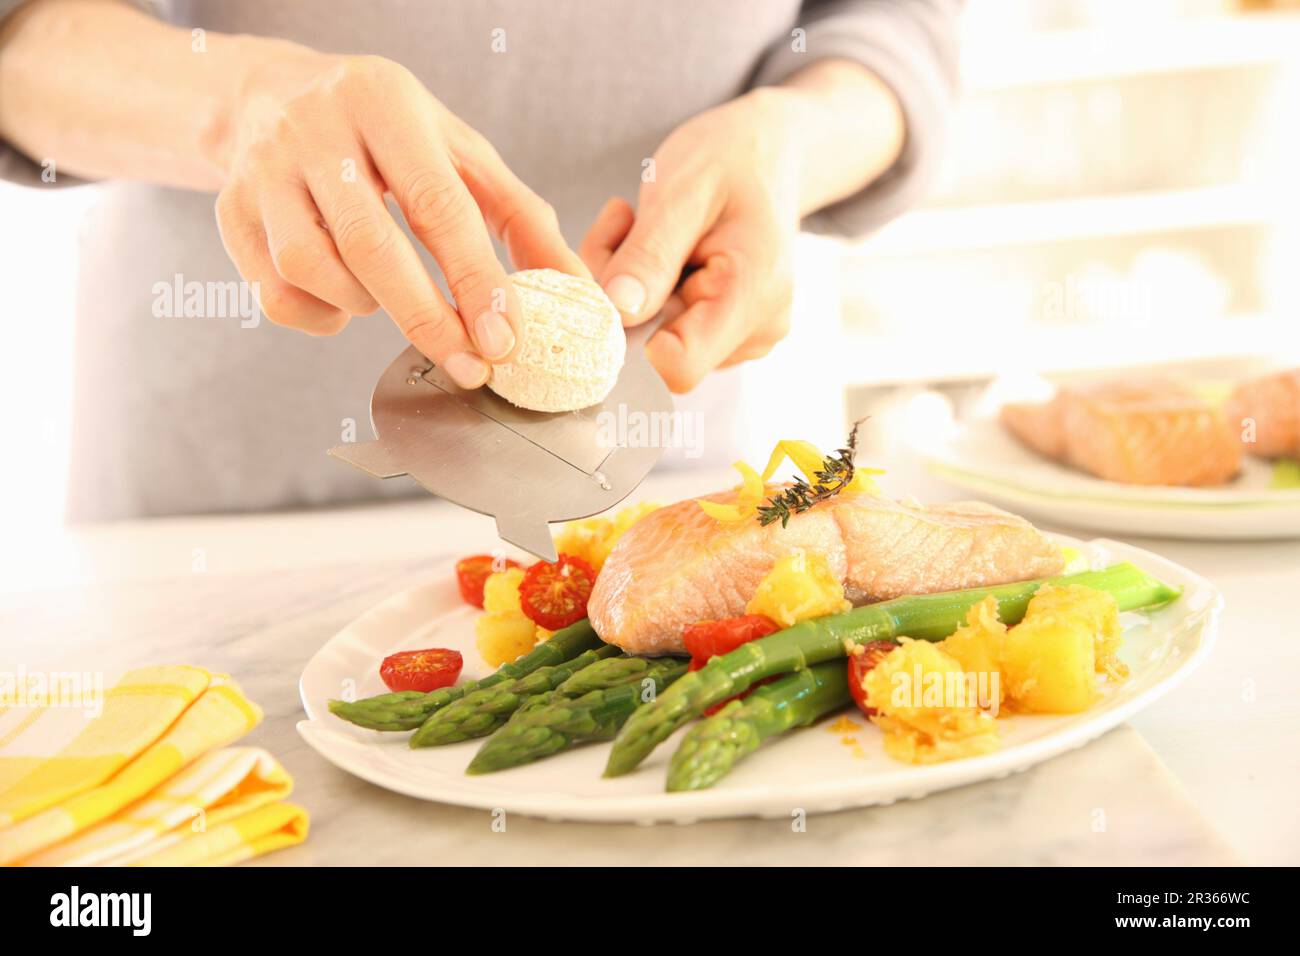 https://c8.alamy.com/comp/2R366WC/salmon-fillet-confit-with-green-asparagus-crispy-diced-potatoes-and-goats-cheese-2R366WC.jpg